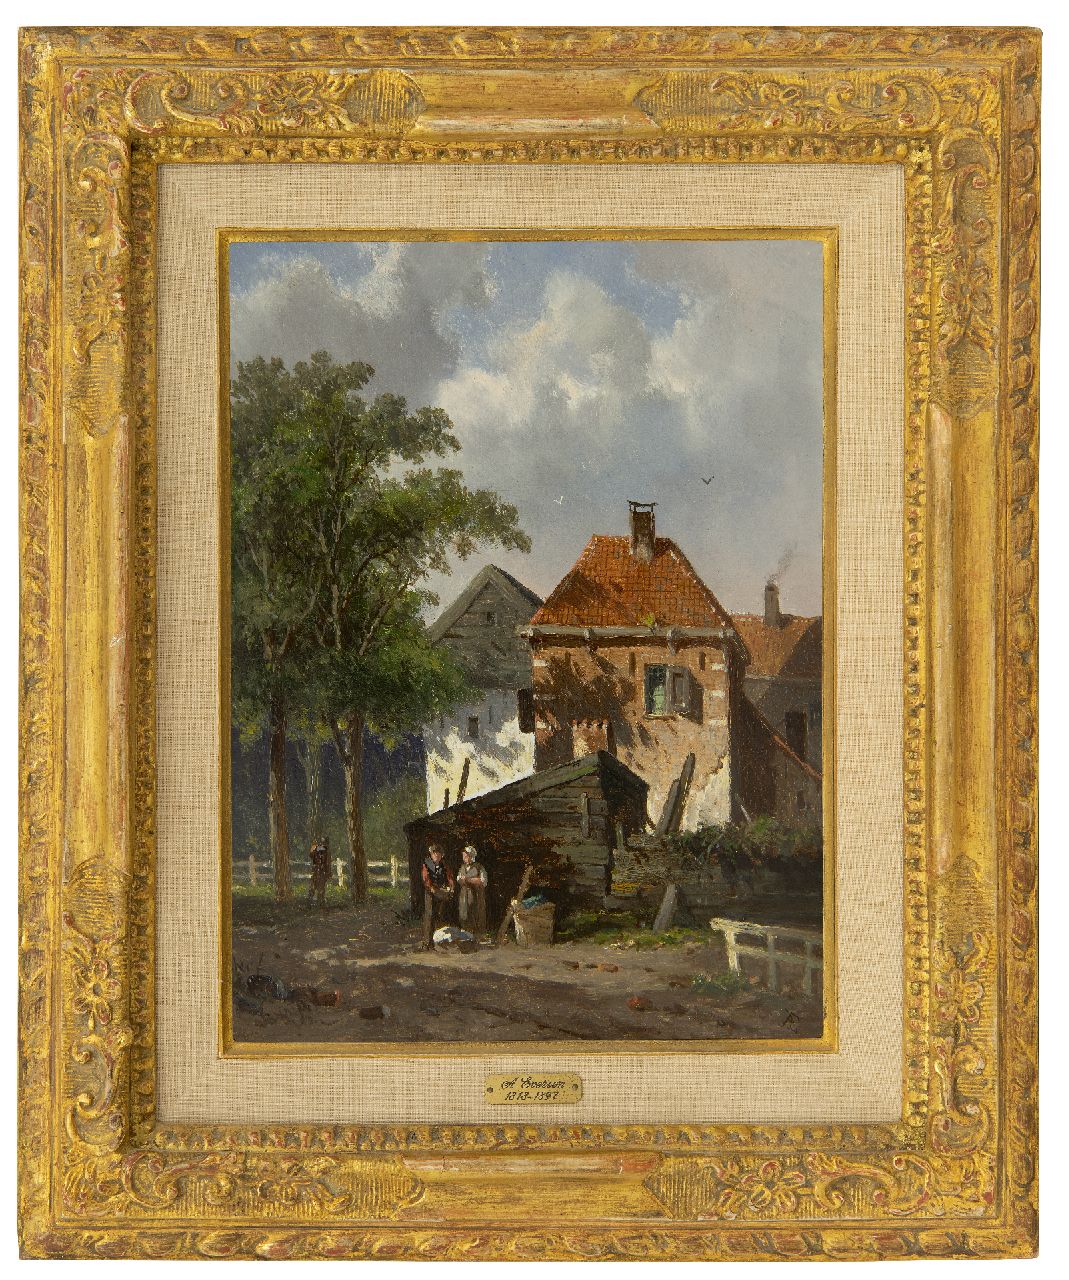 Eversen A.  | Adrianus Eversen | Paintings offered for sale | Sunny village view, oil on panel 27.0 x 20.0 cm, signed l.r. with monogram